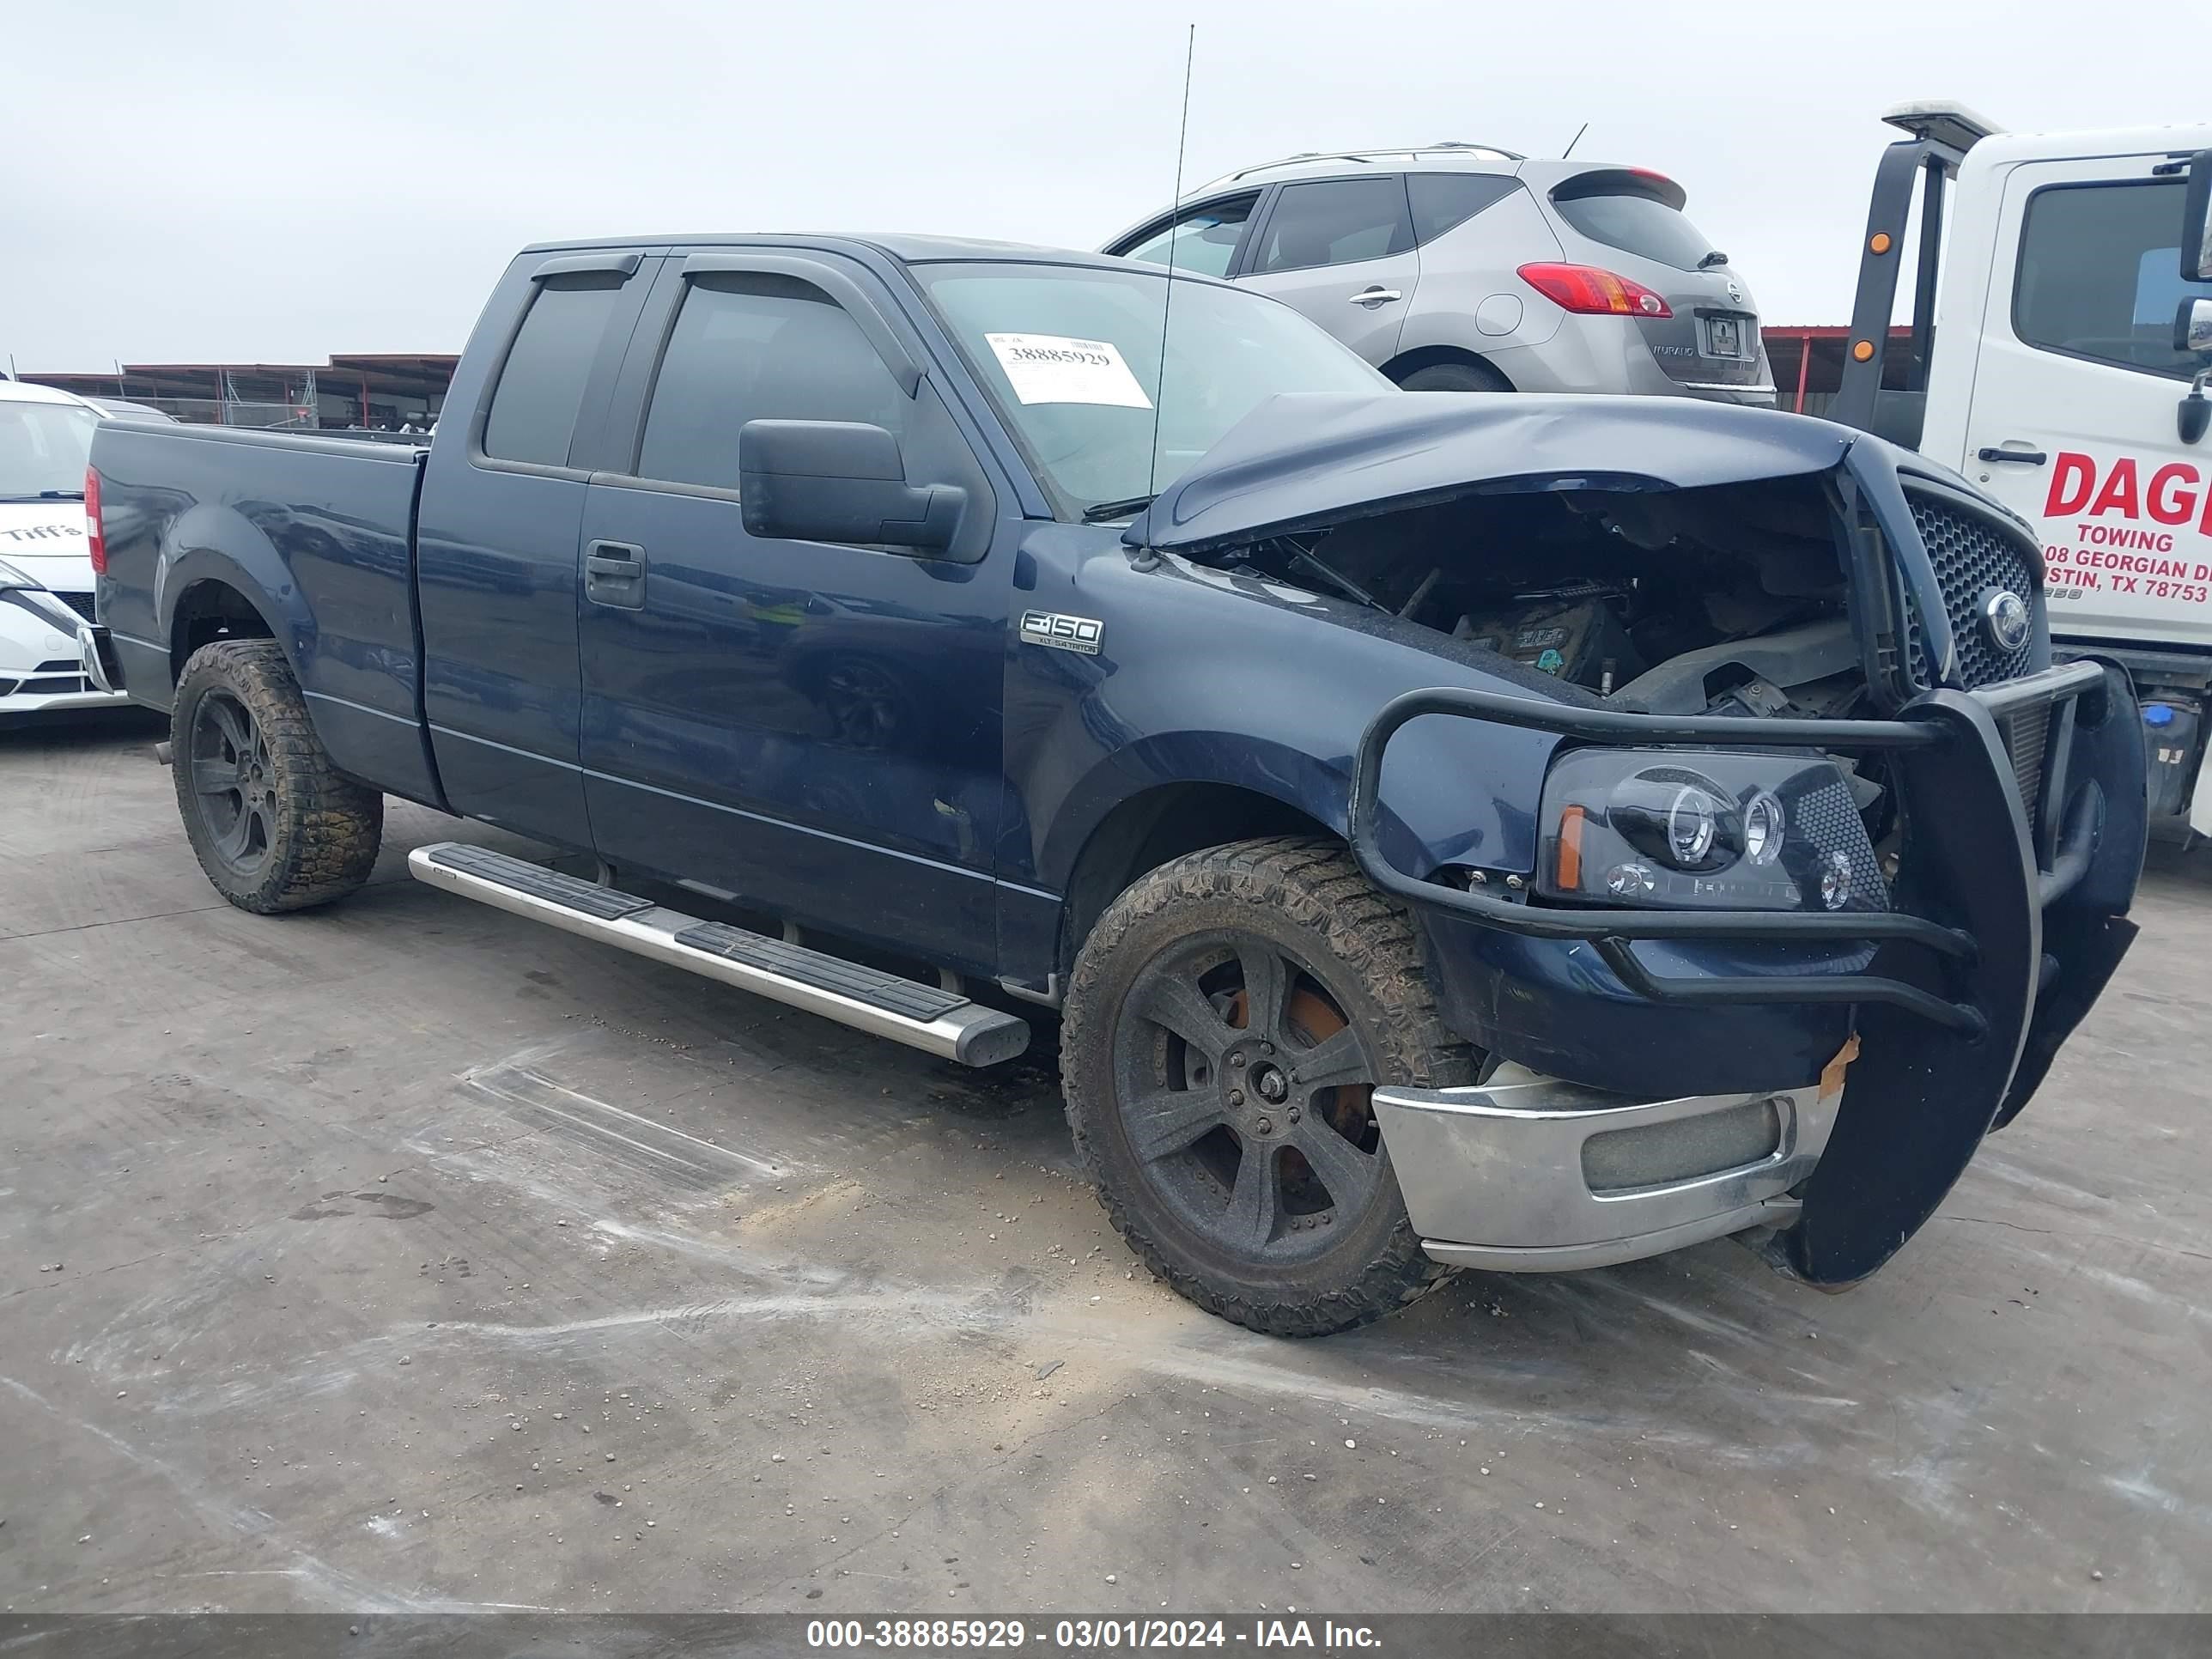 vin: 1FTPX12564NB15770 1FTPX12564NB15770 2004 ford f-150 5400 for Sale in 78616, 2191 Highway 21 West, Dale, Texas, USA